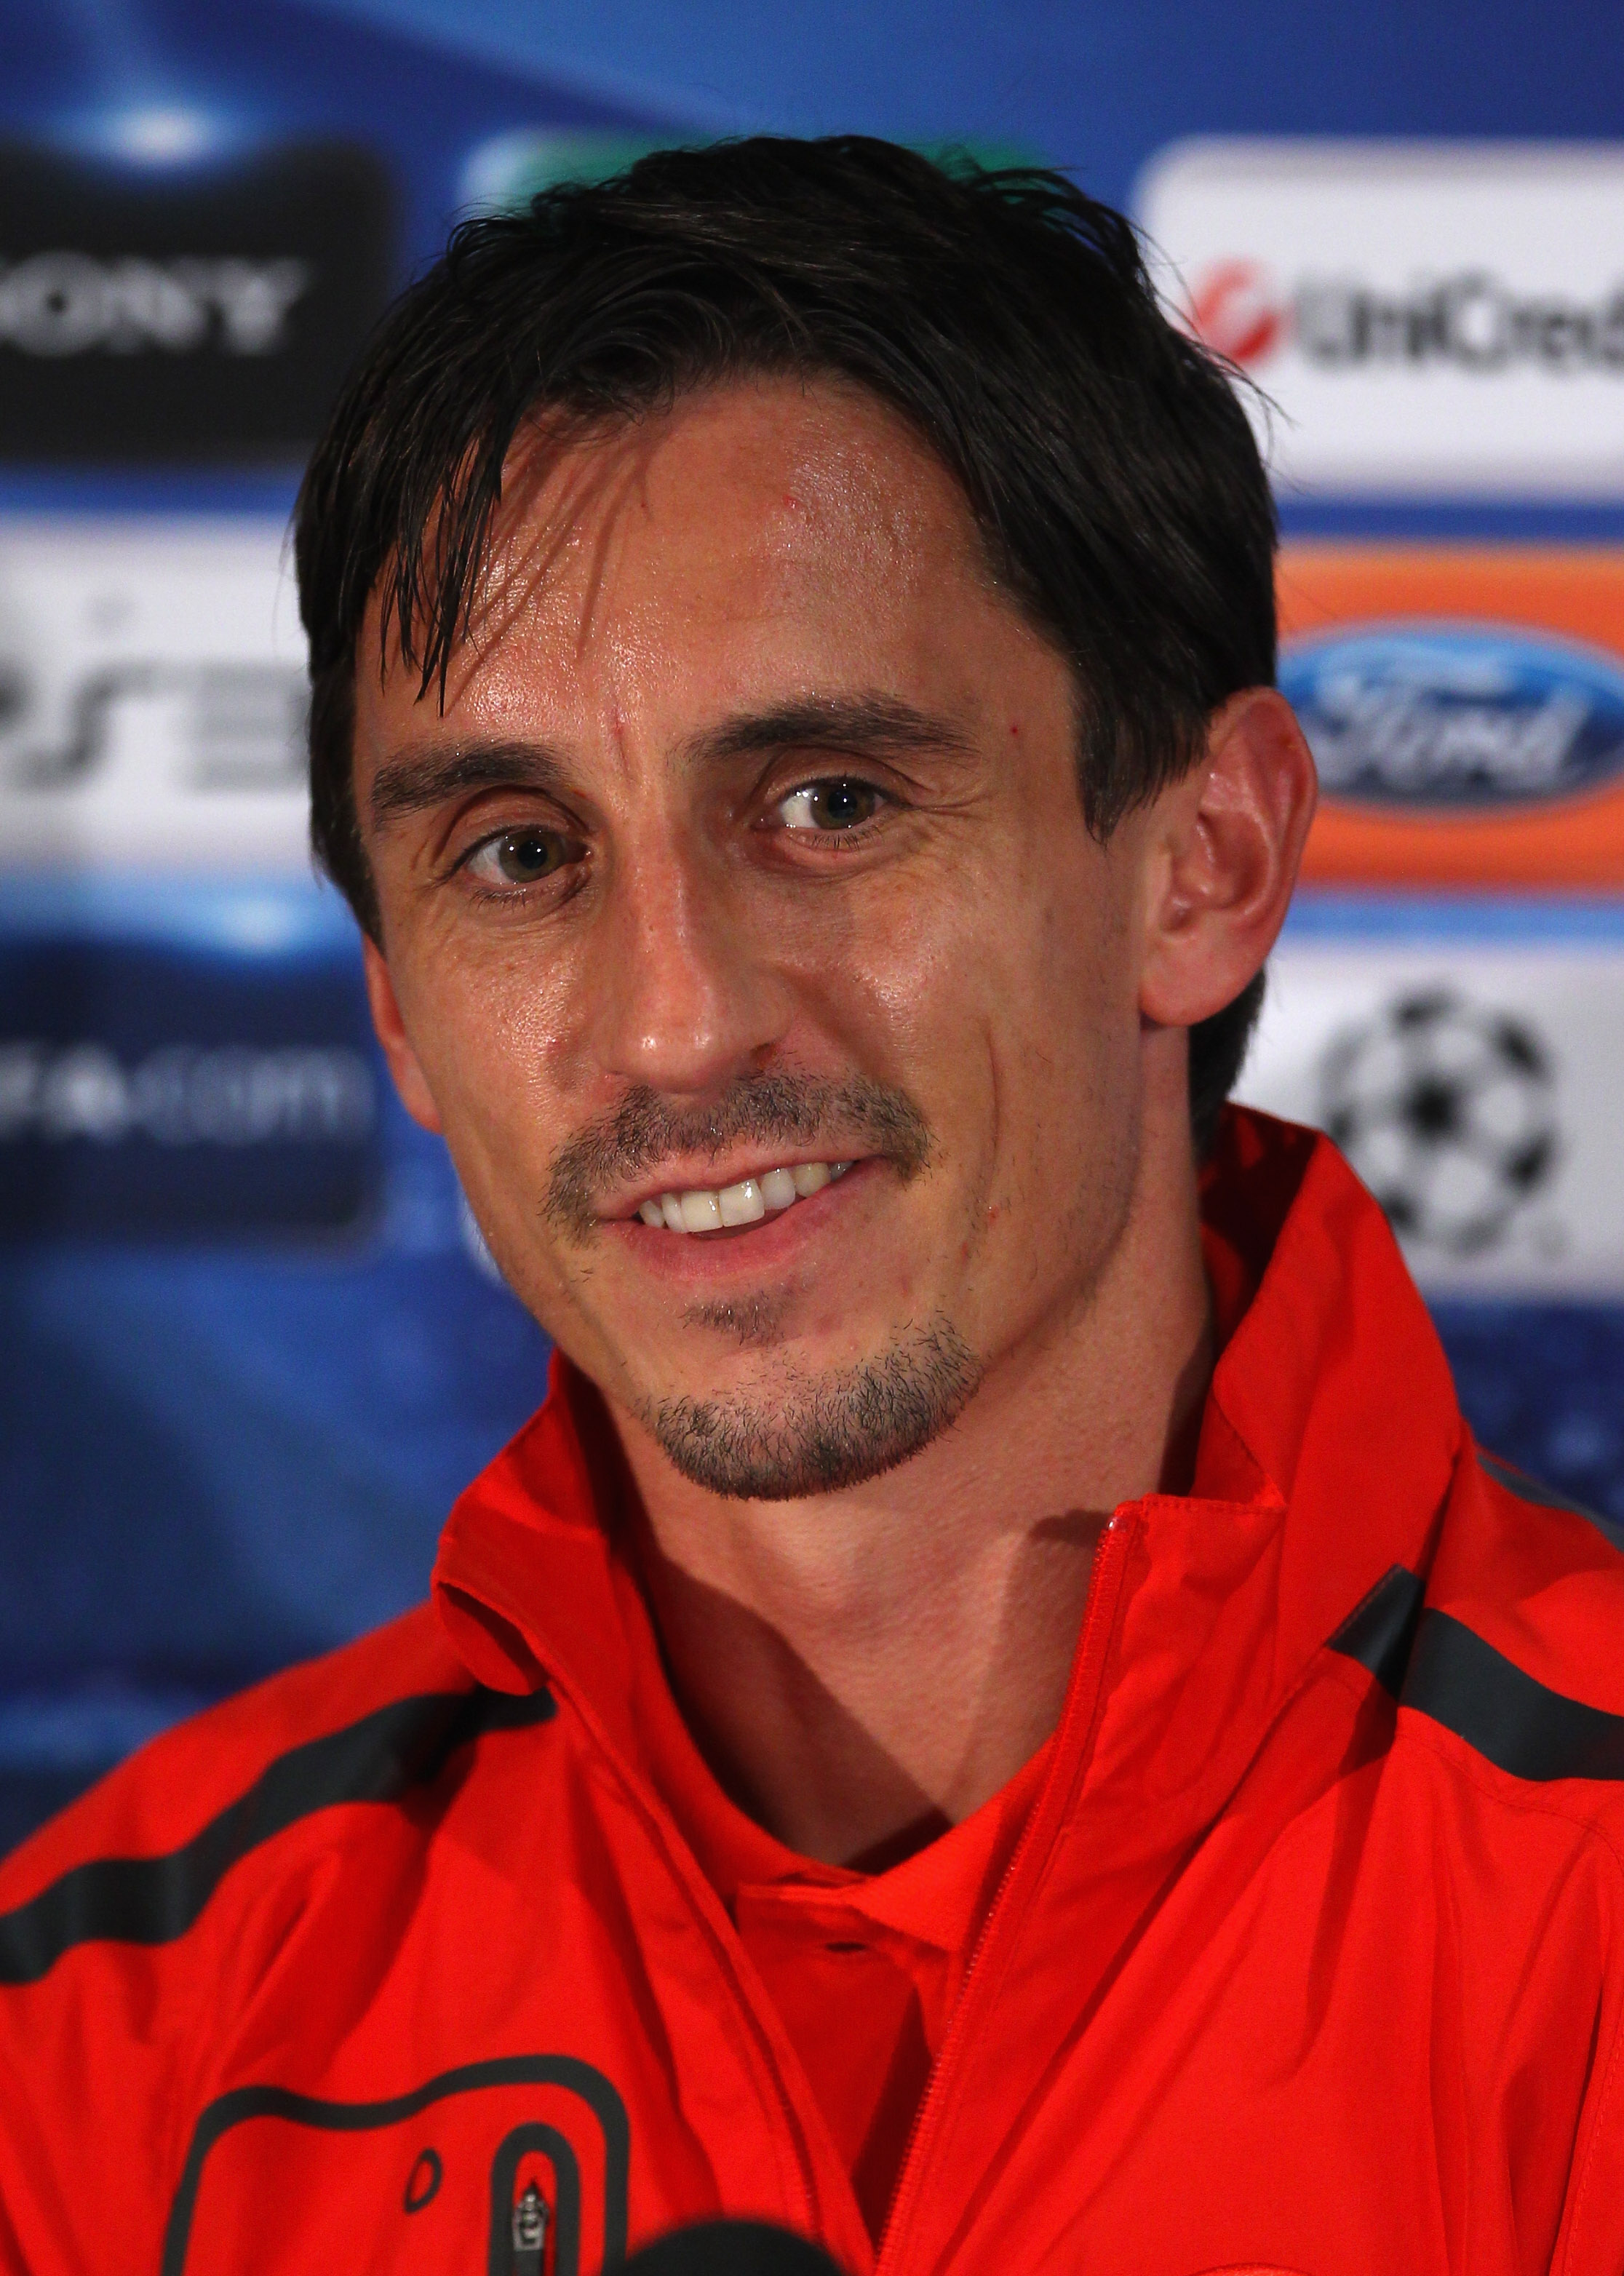 MANCHESTER, ENGLAND - SEPTEMBER 13:  Gary Neville of Manchester United faces the media during a press conference ahead of their UEFA Champions League match against Rangers held at Carrington Training Ground on September 13, 2010 in Manchester, England.  (